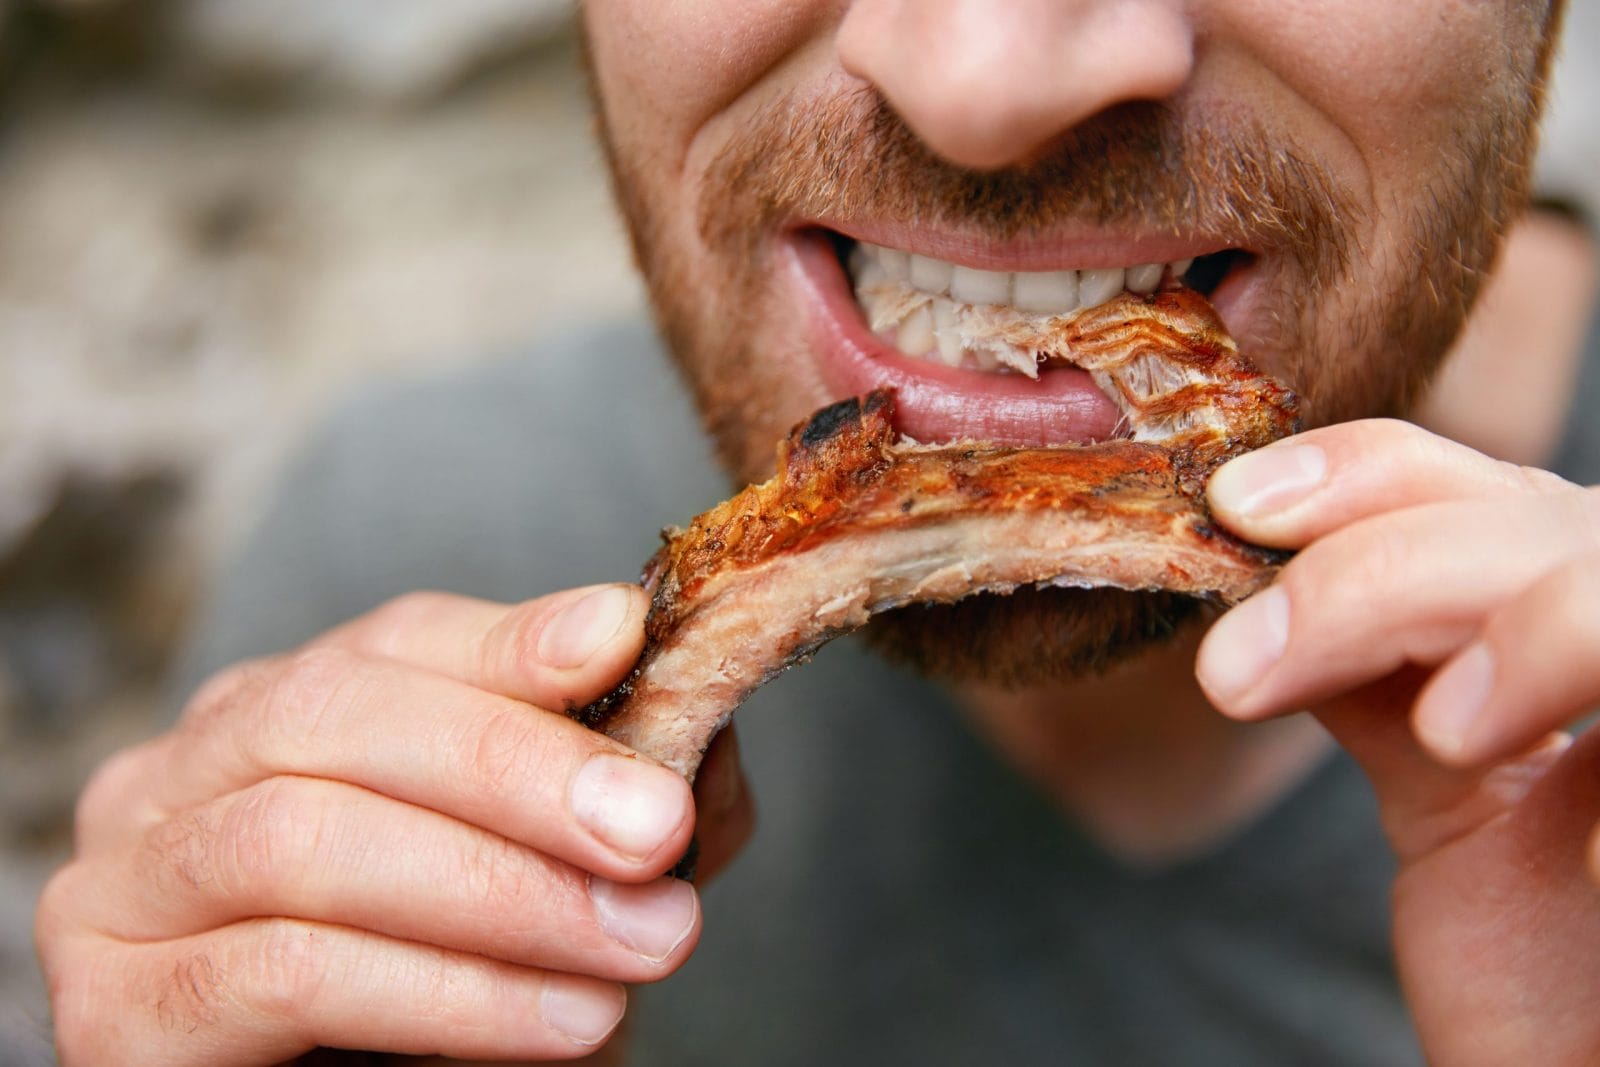 Man eating piece of meat